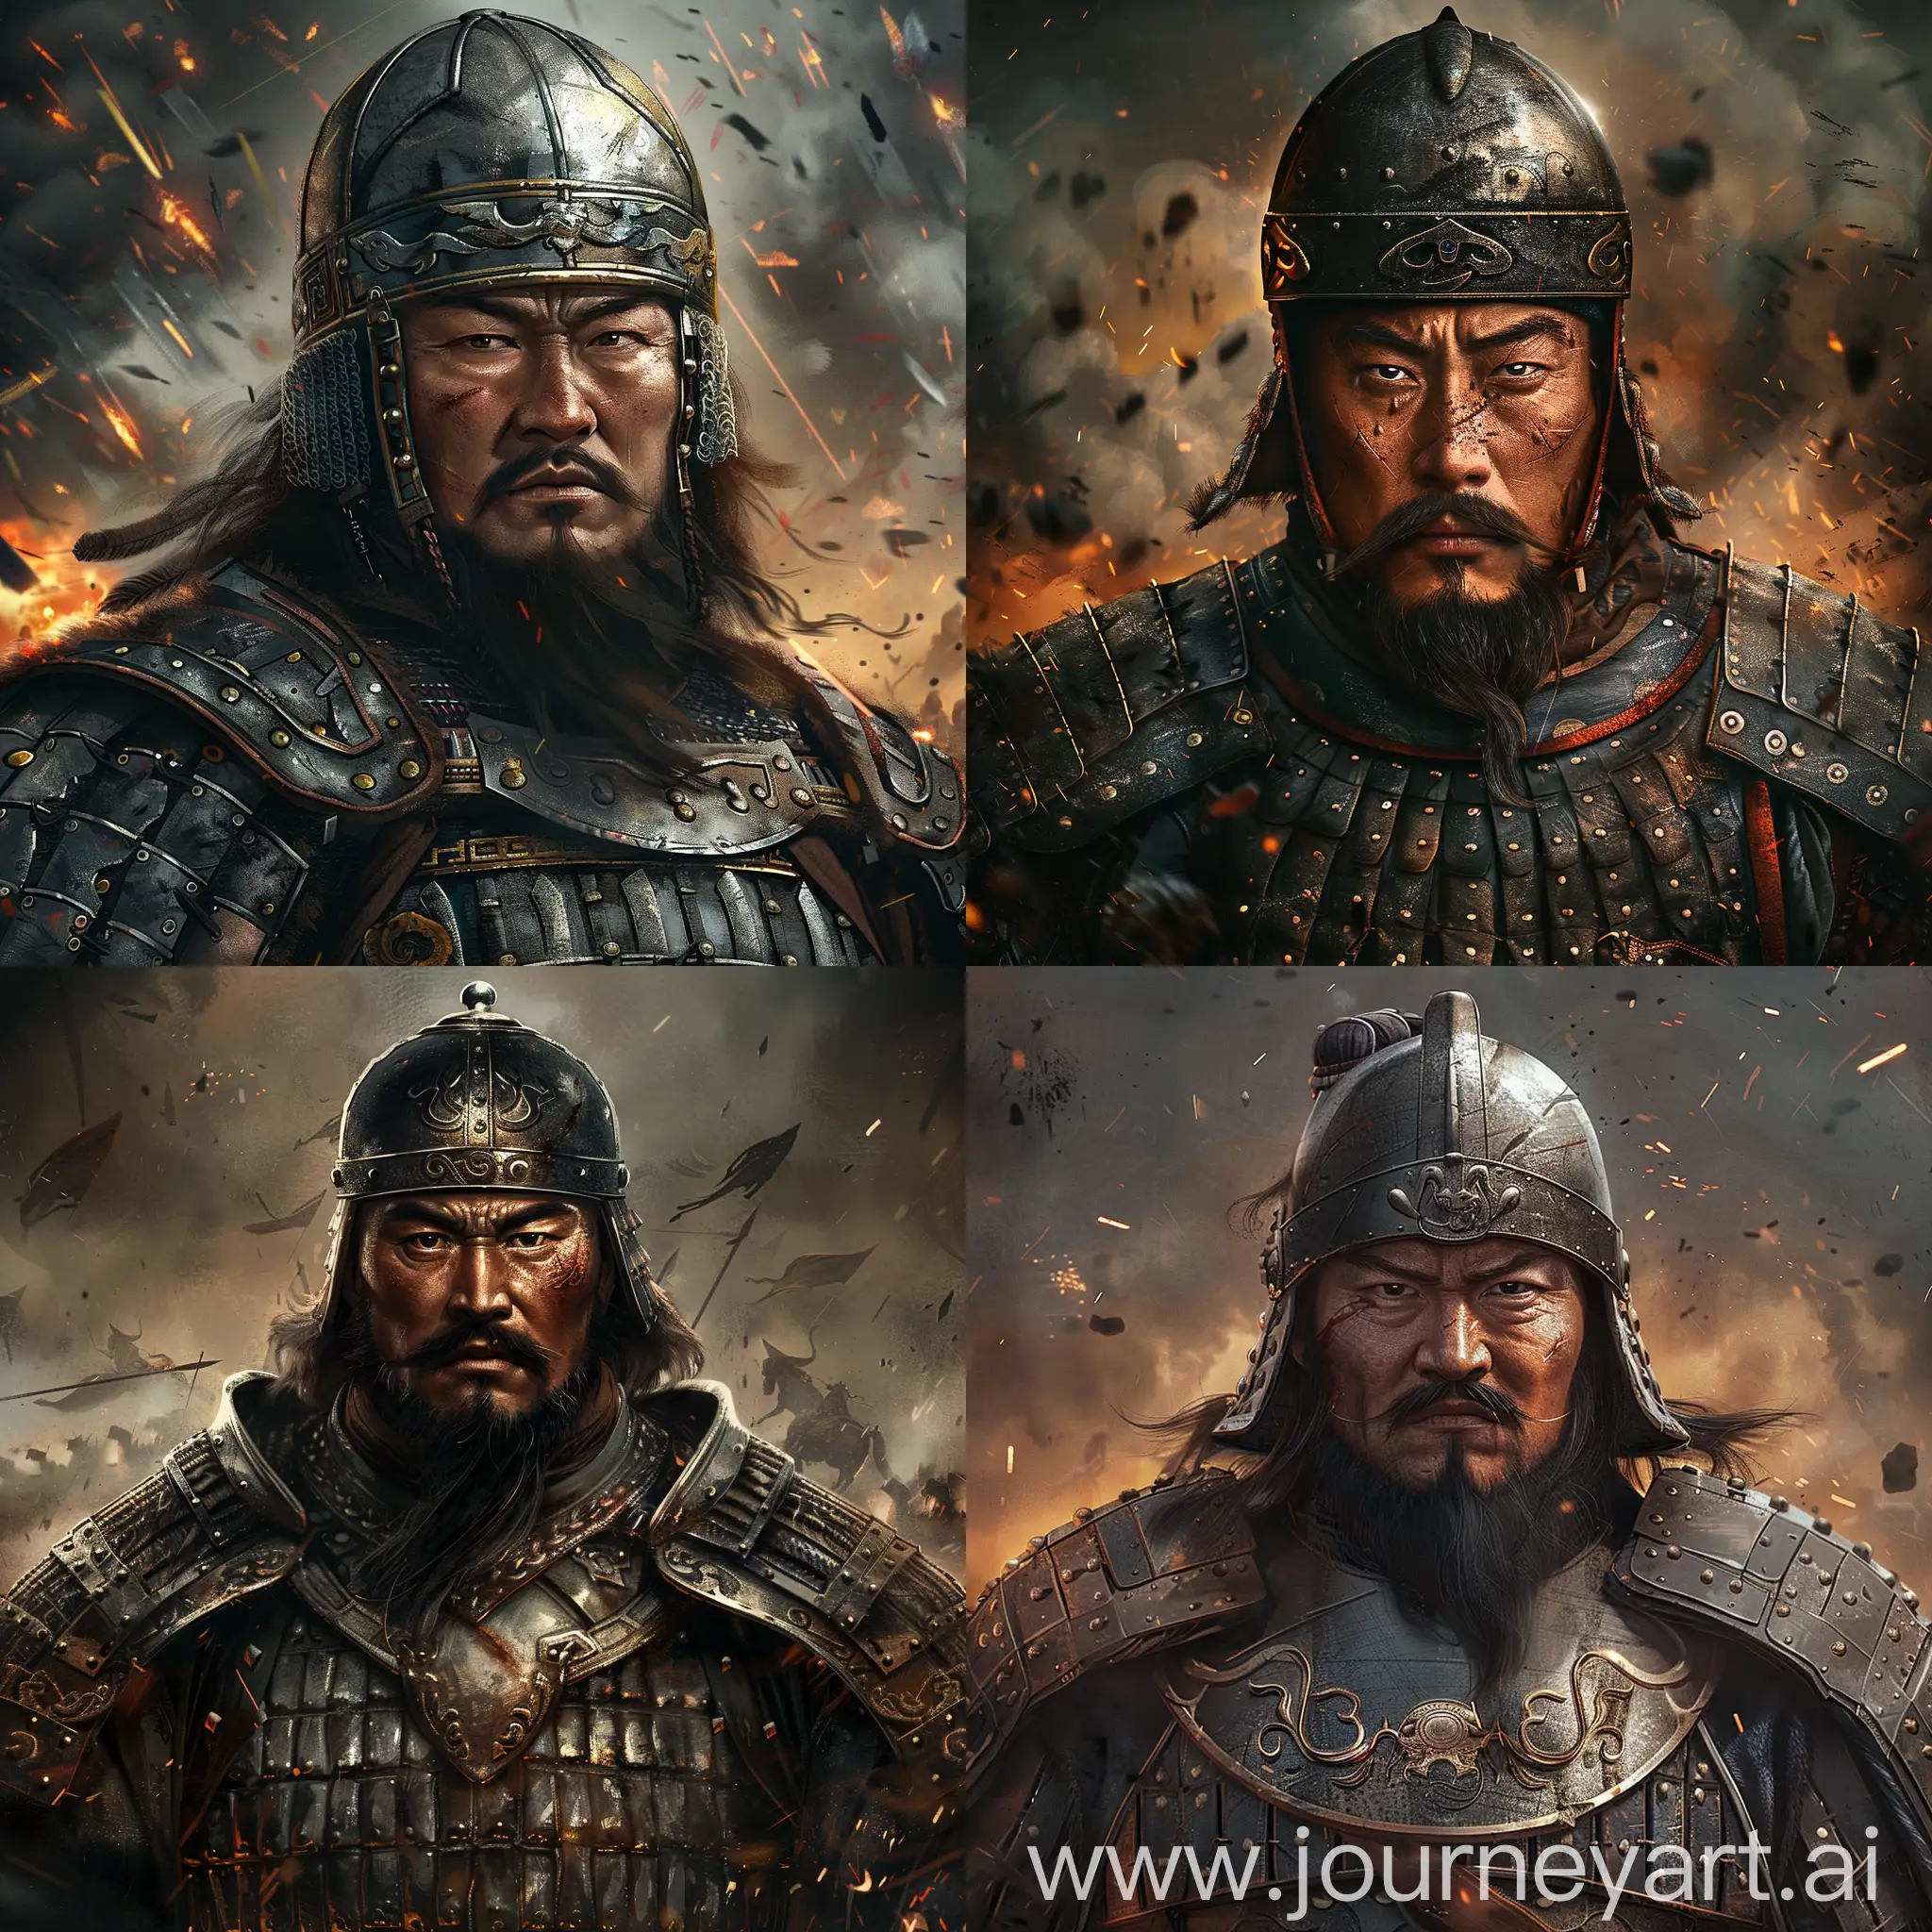 Portrait-of-Genghis-Khan-in-Mongolian-Lamellar-Armor-Amidst-War-and-Chaos